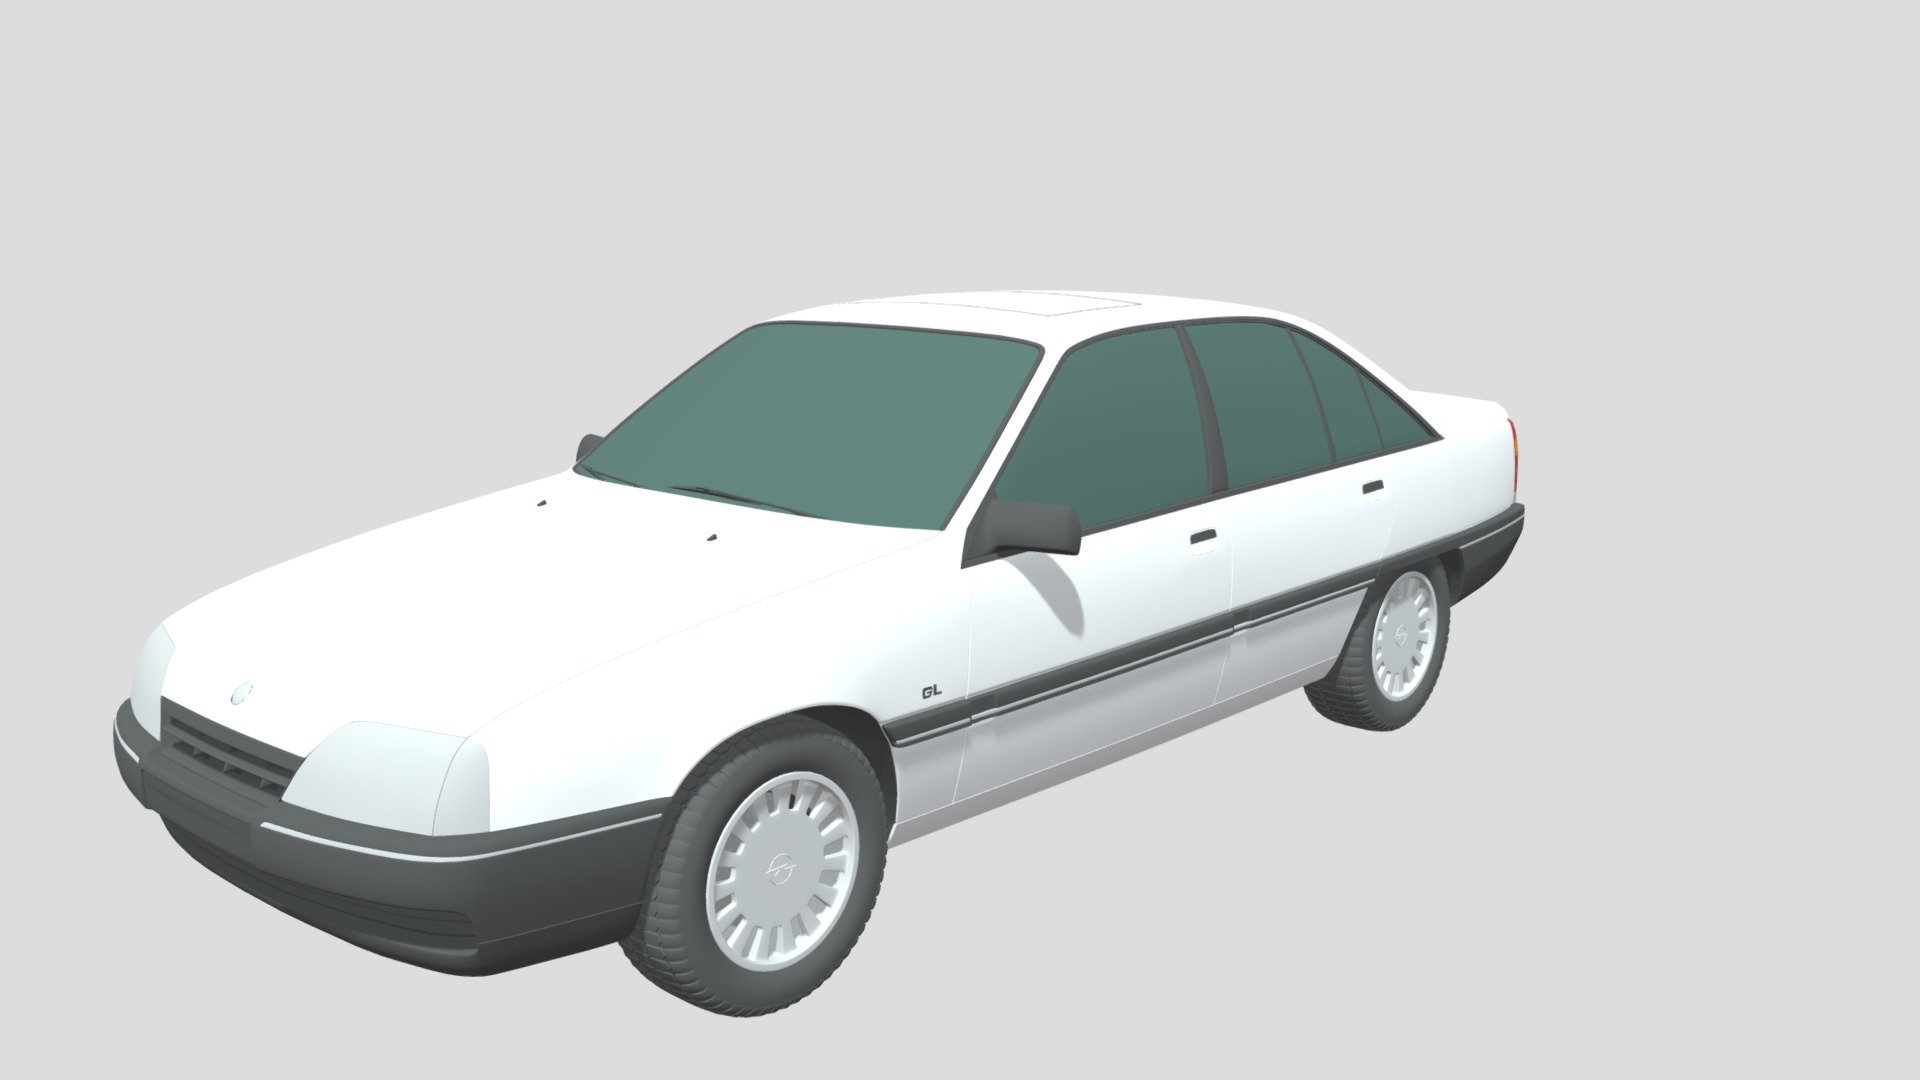 Introducing our stunning photorealistic 3D model of the Opel Omega (Type A) Sedan (1987) car, a true masterpiece of digital craftsmanship that will elevate your projects to the next level. This meticulously crafted model captures every curve, detail, and essence of a real Opel Omega (Type A) Sedan (1987) car, providing you with unparalleled realism and versatility for your creative endeavors.

Our photorealistic 3D model of the Opel Omega (Type A) Sedan (1987) car is a testament to precision and attention to detail. Each contour, from the sleek body lines to the intricacies of the headlights and tail lights, has been painstakingly recreated to mirror the elegance and realism of a genuine Opel Omega (Type A) Sedan (1987) automobile. Whether you're an automotive designer, a video game developer, or a filmmaker, this 3D model will bring your visions to life with exceptional fidelity 3d model